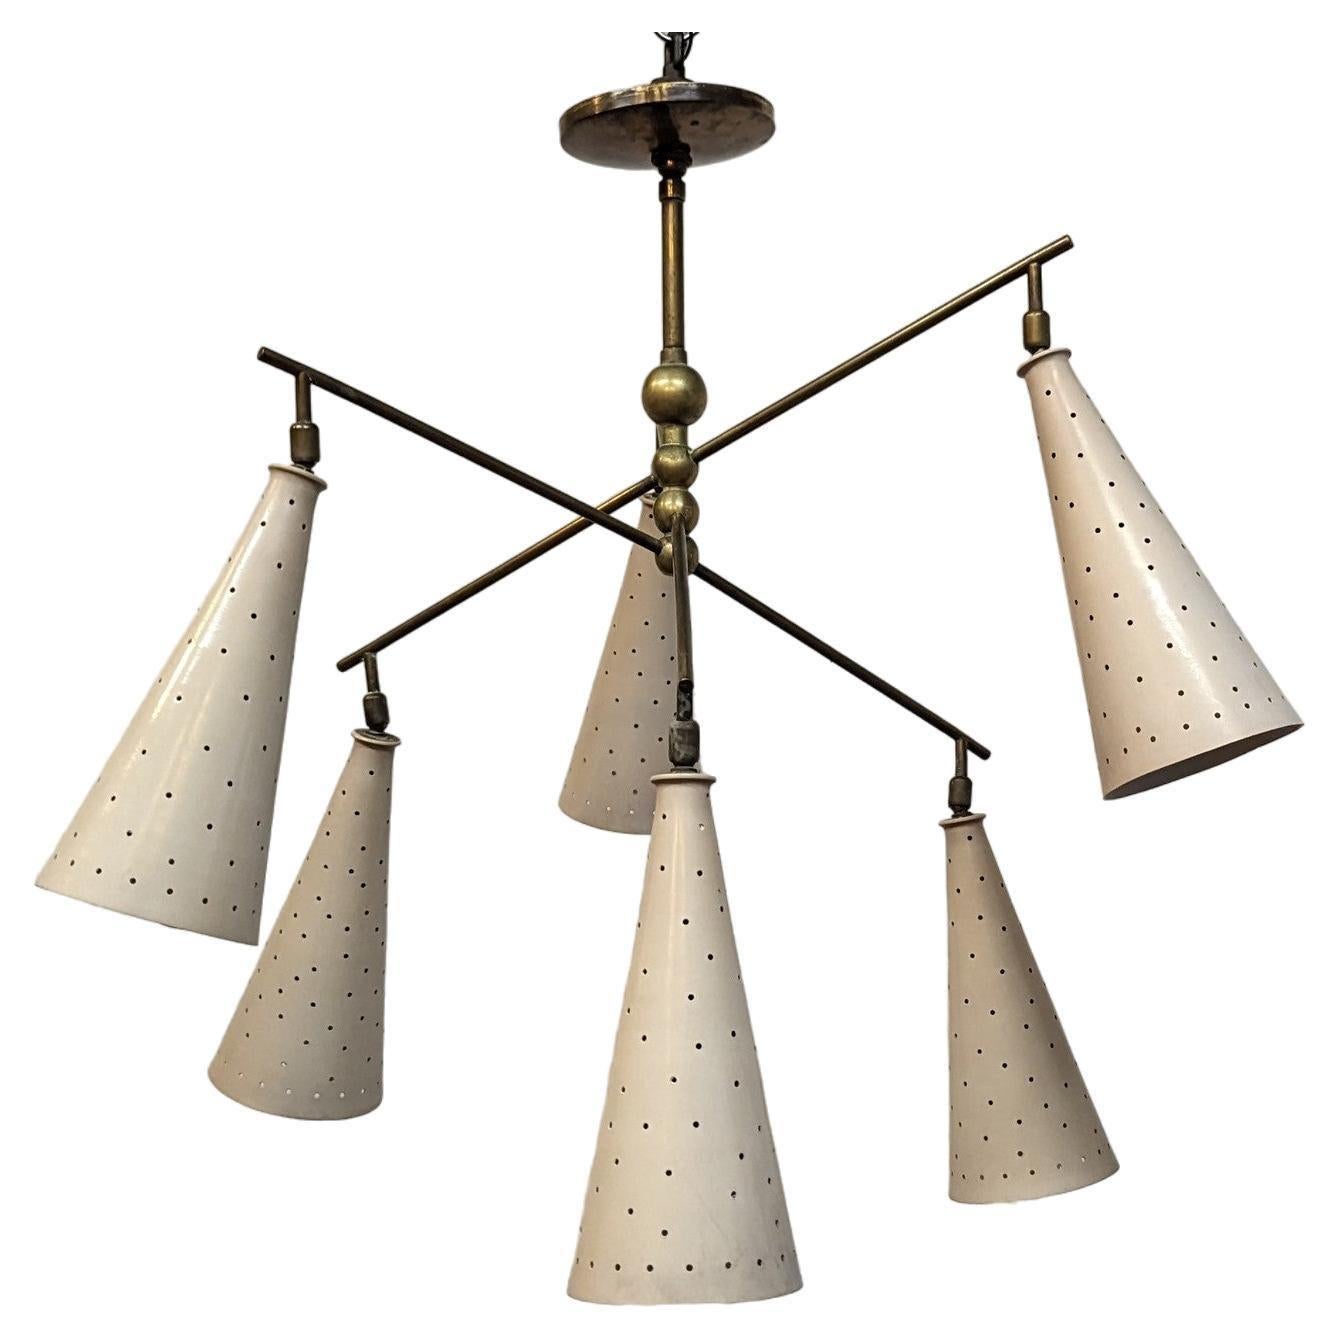  Mid Century Modern Articulating Chandelier Pendant.  Early 1950's articulating six arm ceiling light brass with aluminum perforated adjustable cone shades.  This light is completely original untouched.  The arms and shades are adjustable and can be